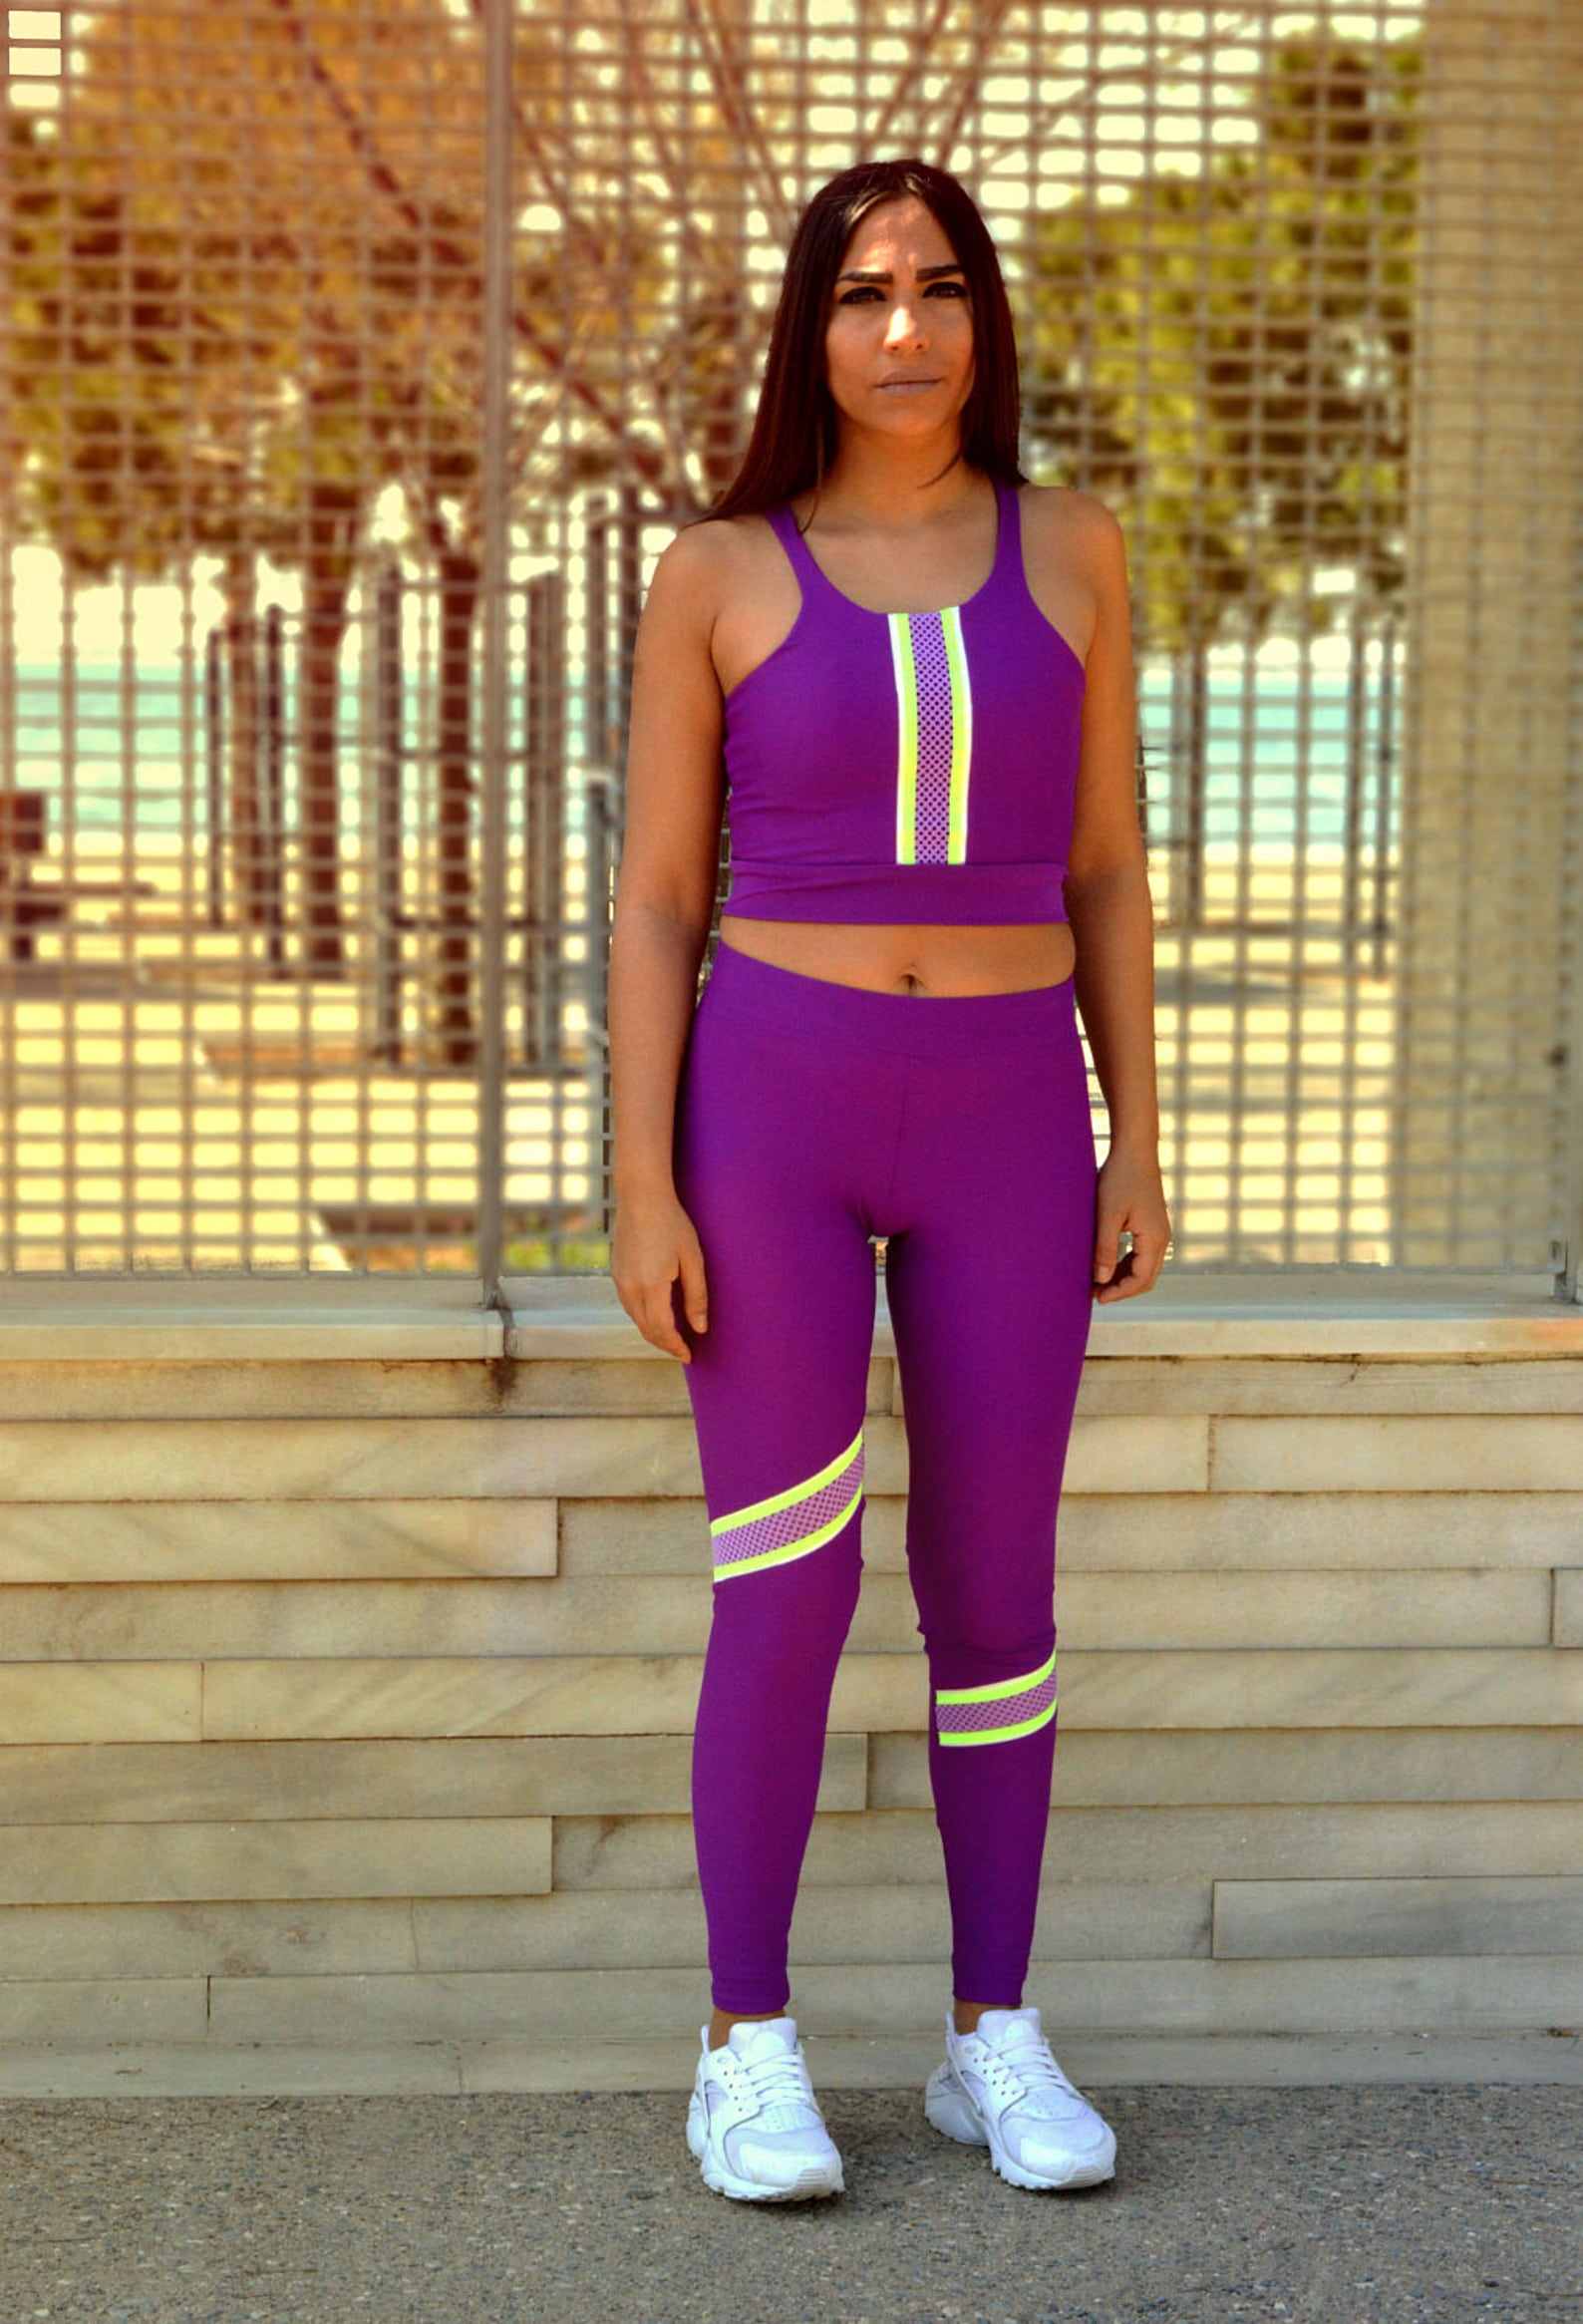 Purple Workout Leggings and Adidas Top tying shoes - Putting Me Together